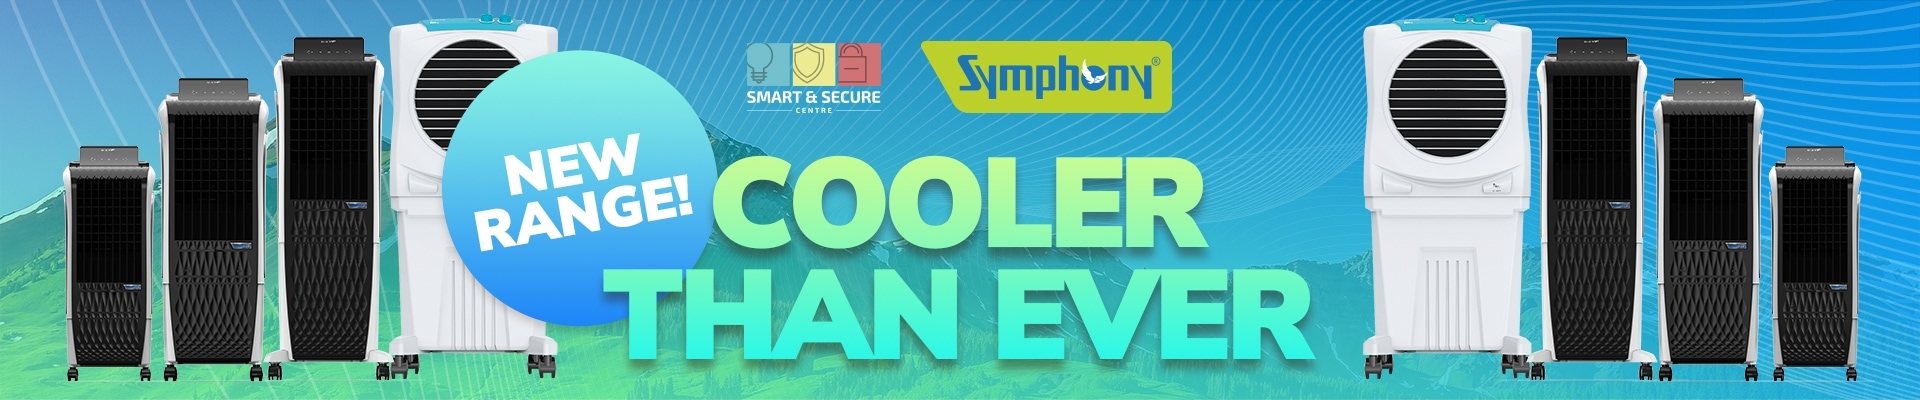 BEAT THE HEAT! New range of Symphony air coolers! Cooler than ever.